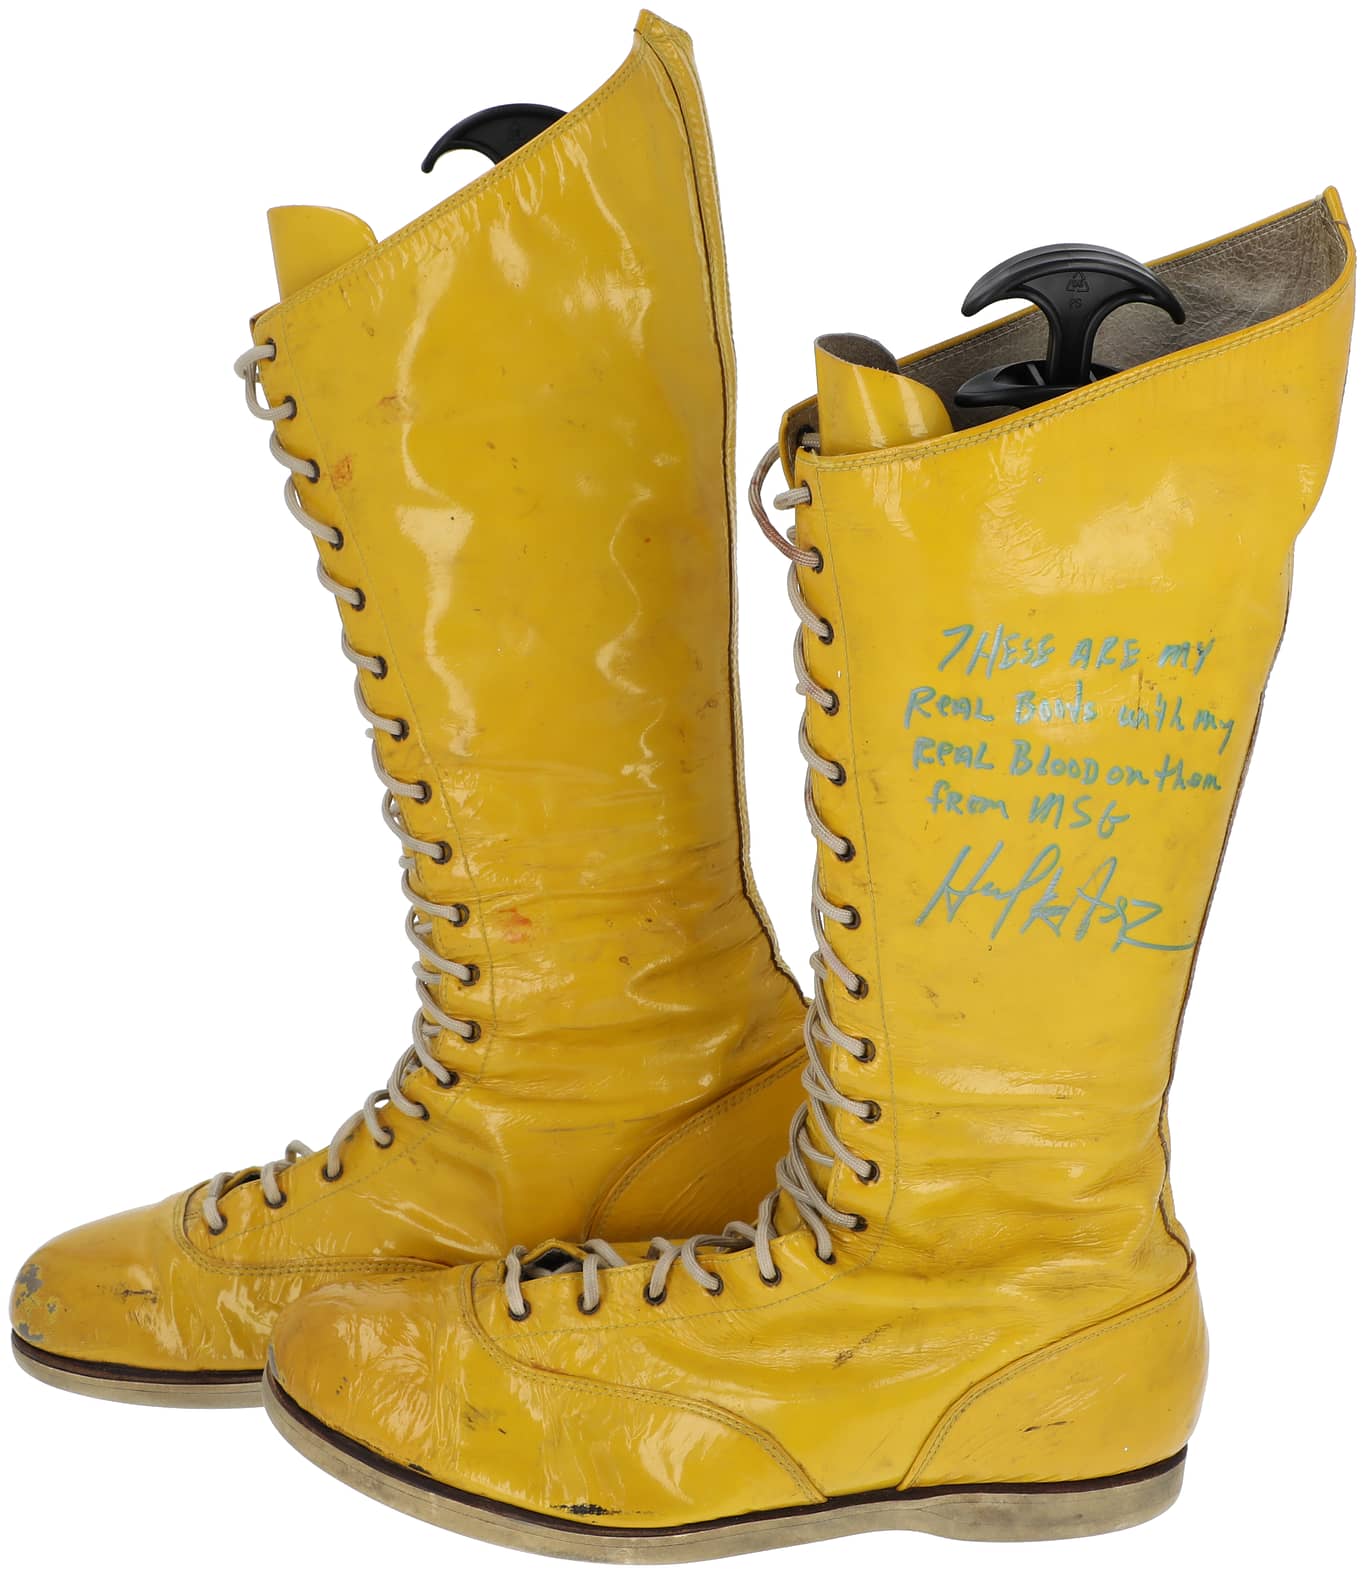 Hulk Hogan WWF Event-Worn, Photo-Matched, Signed and Inscribed, Yellow Boots